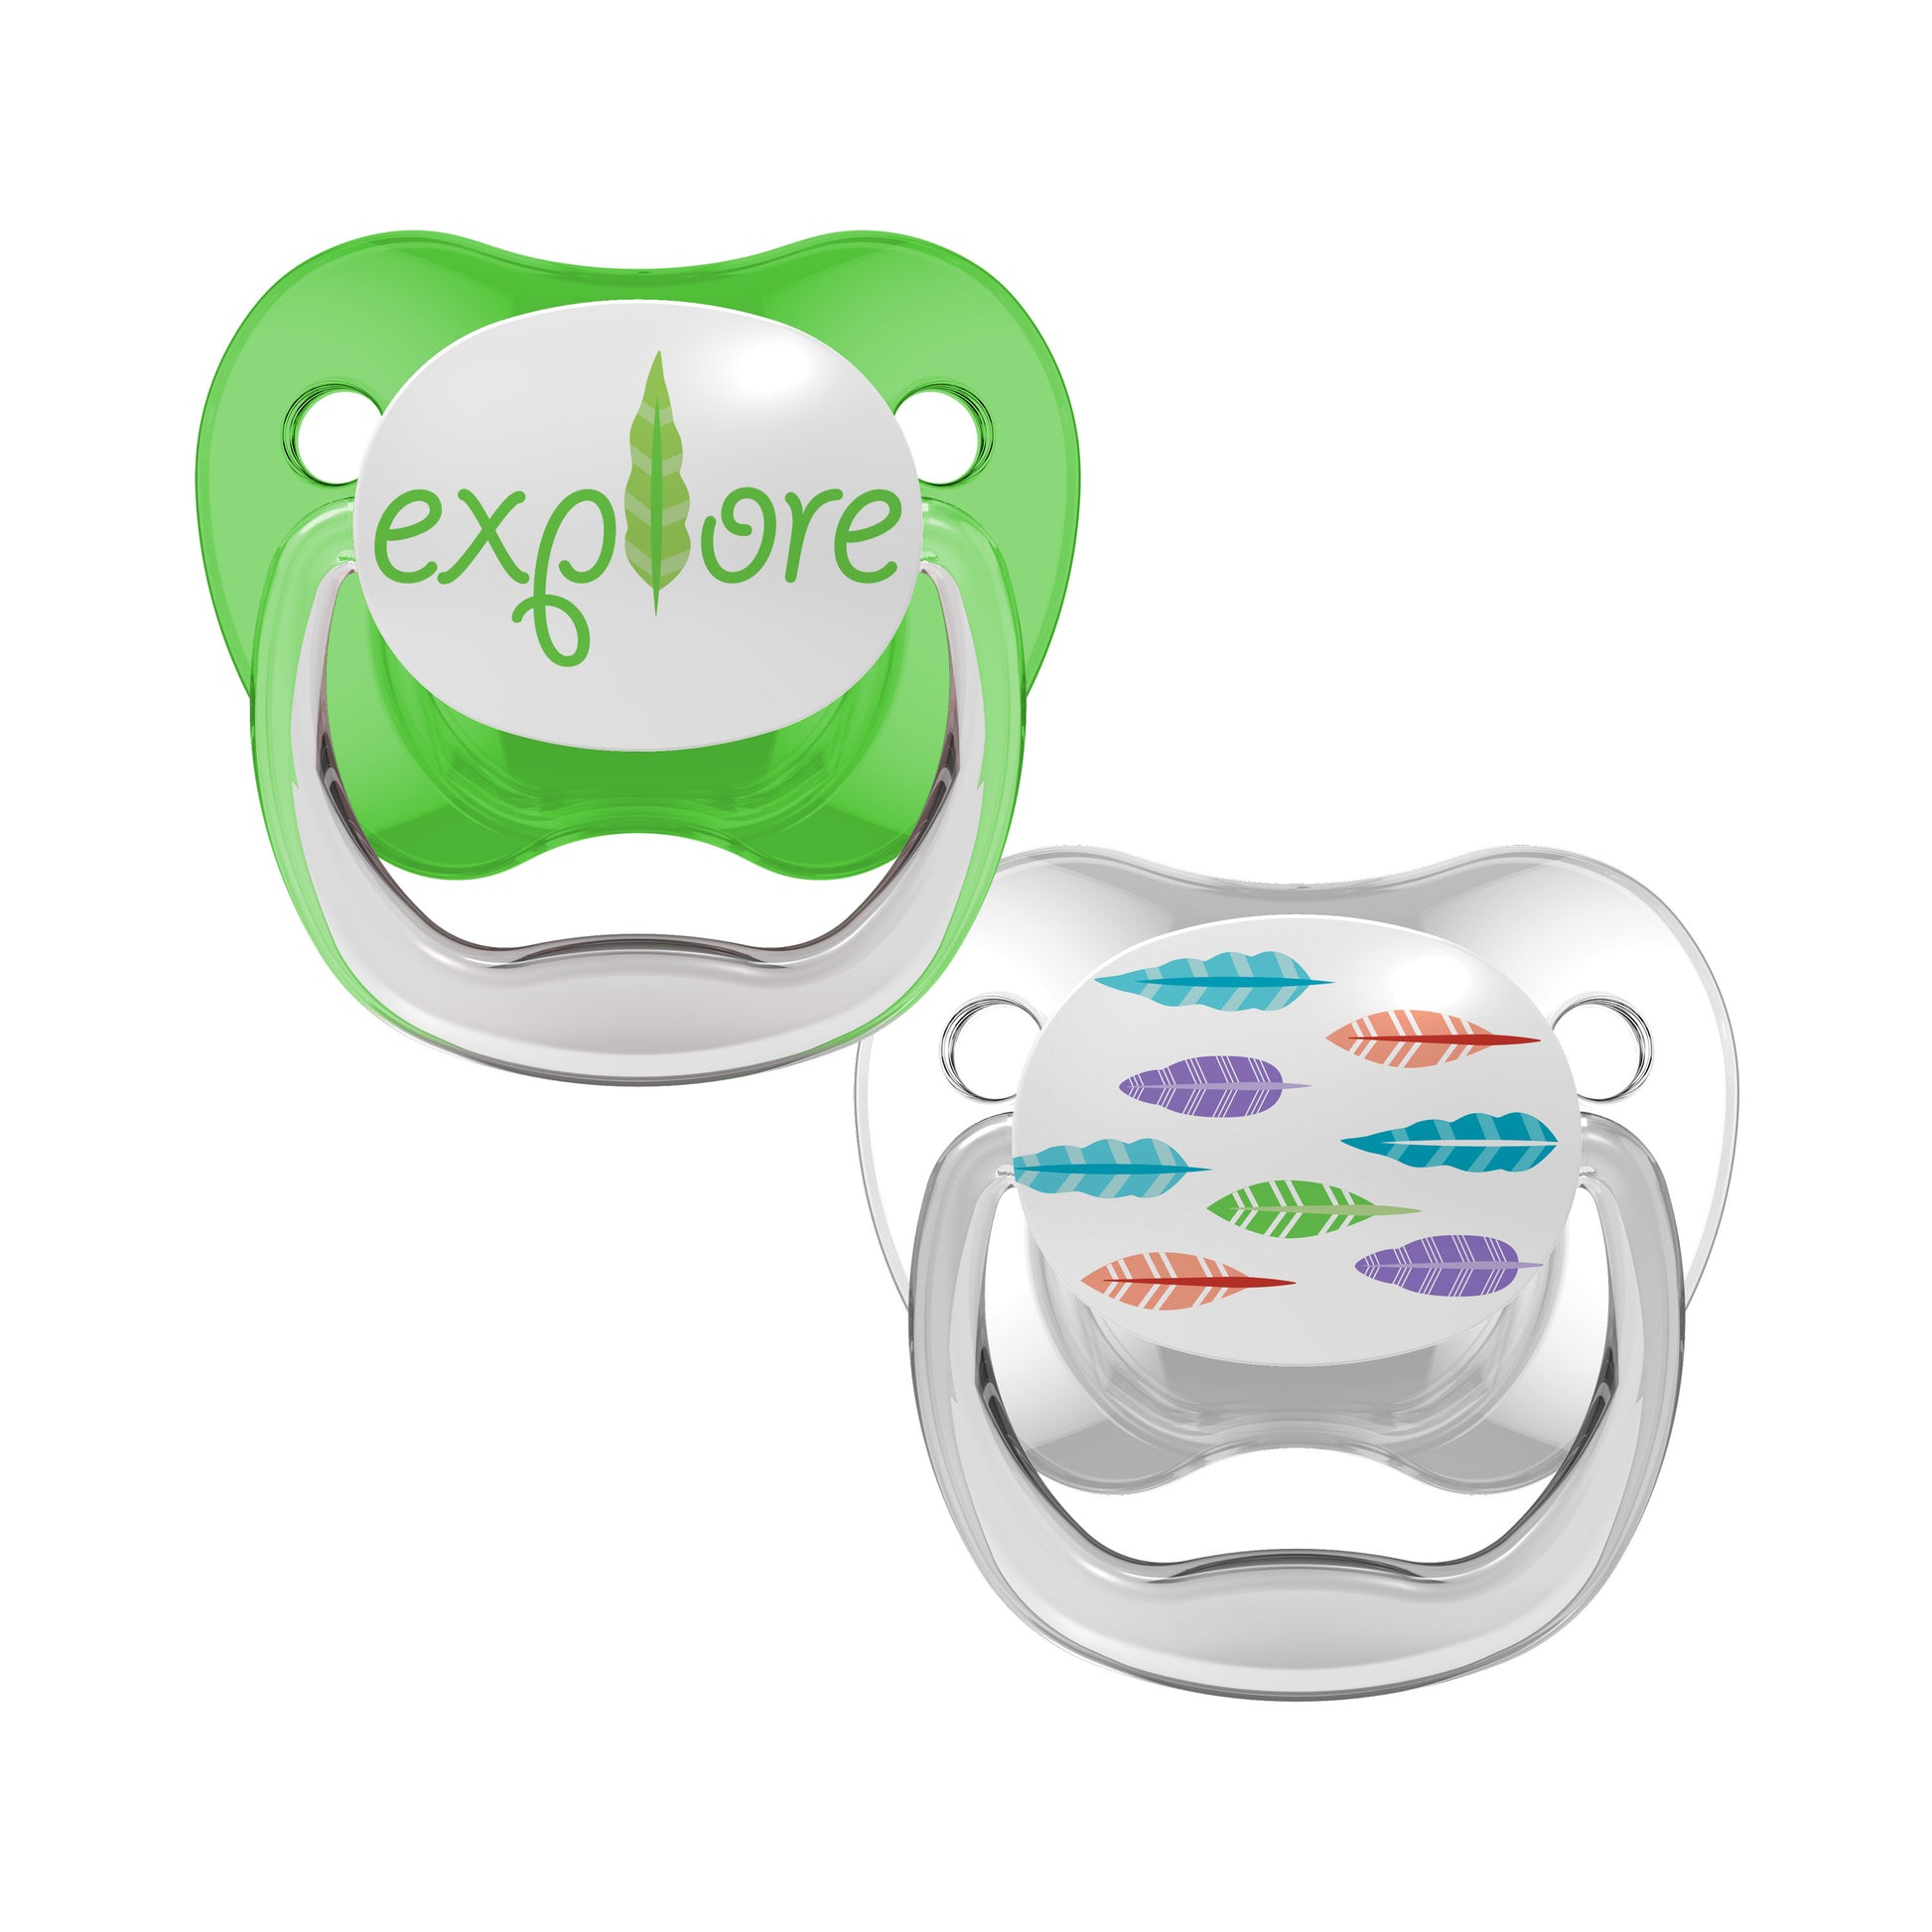 Explore and Feathers Dr.Brown's Newborn Prevent Classic Pacifiers 2-Pack